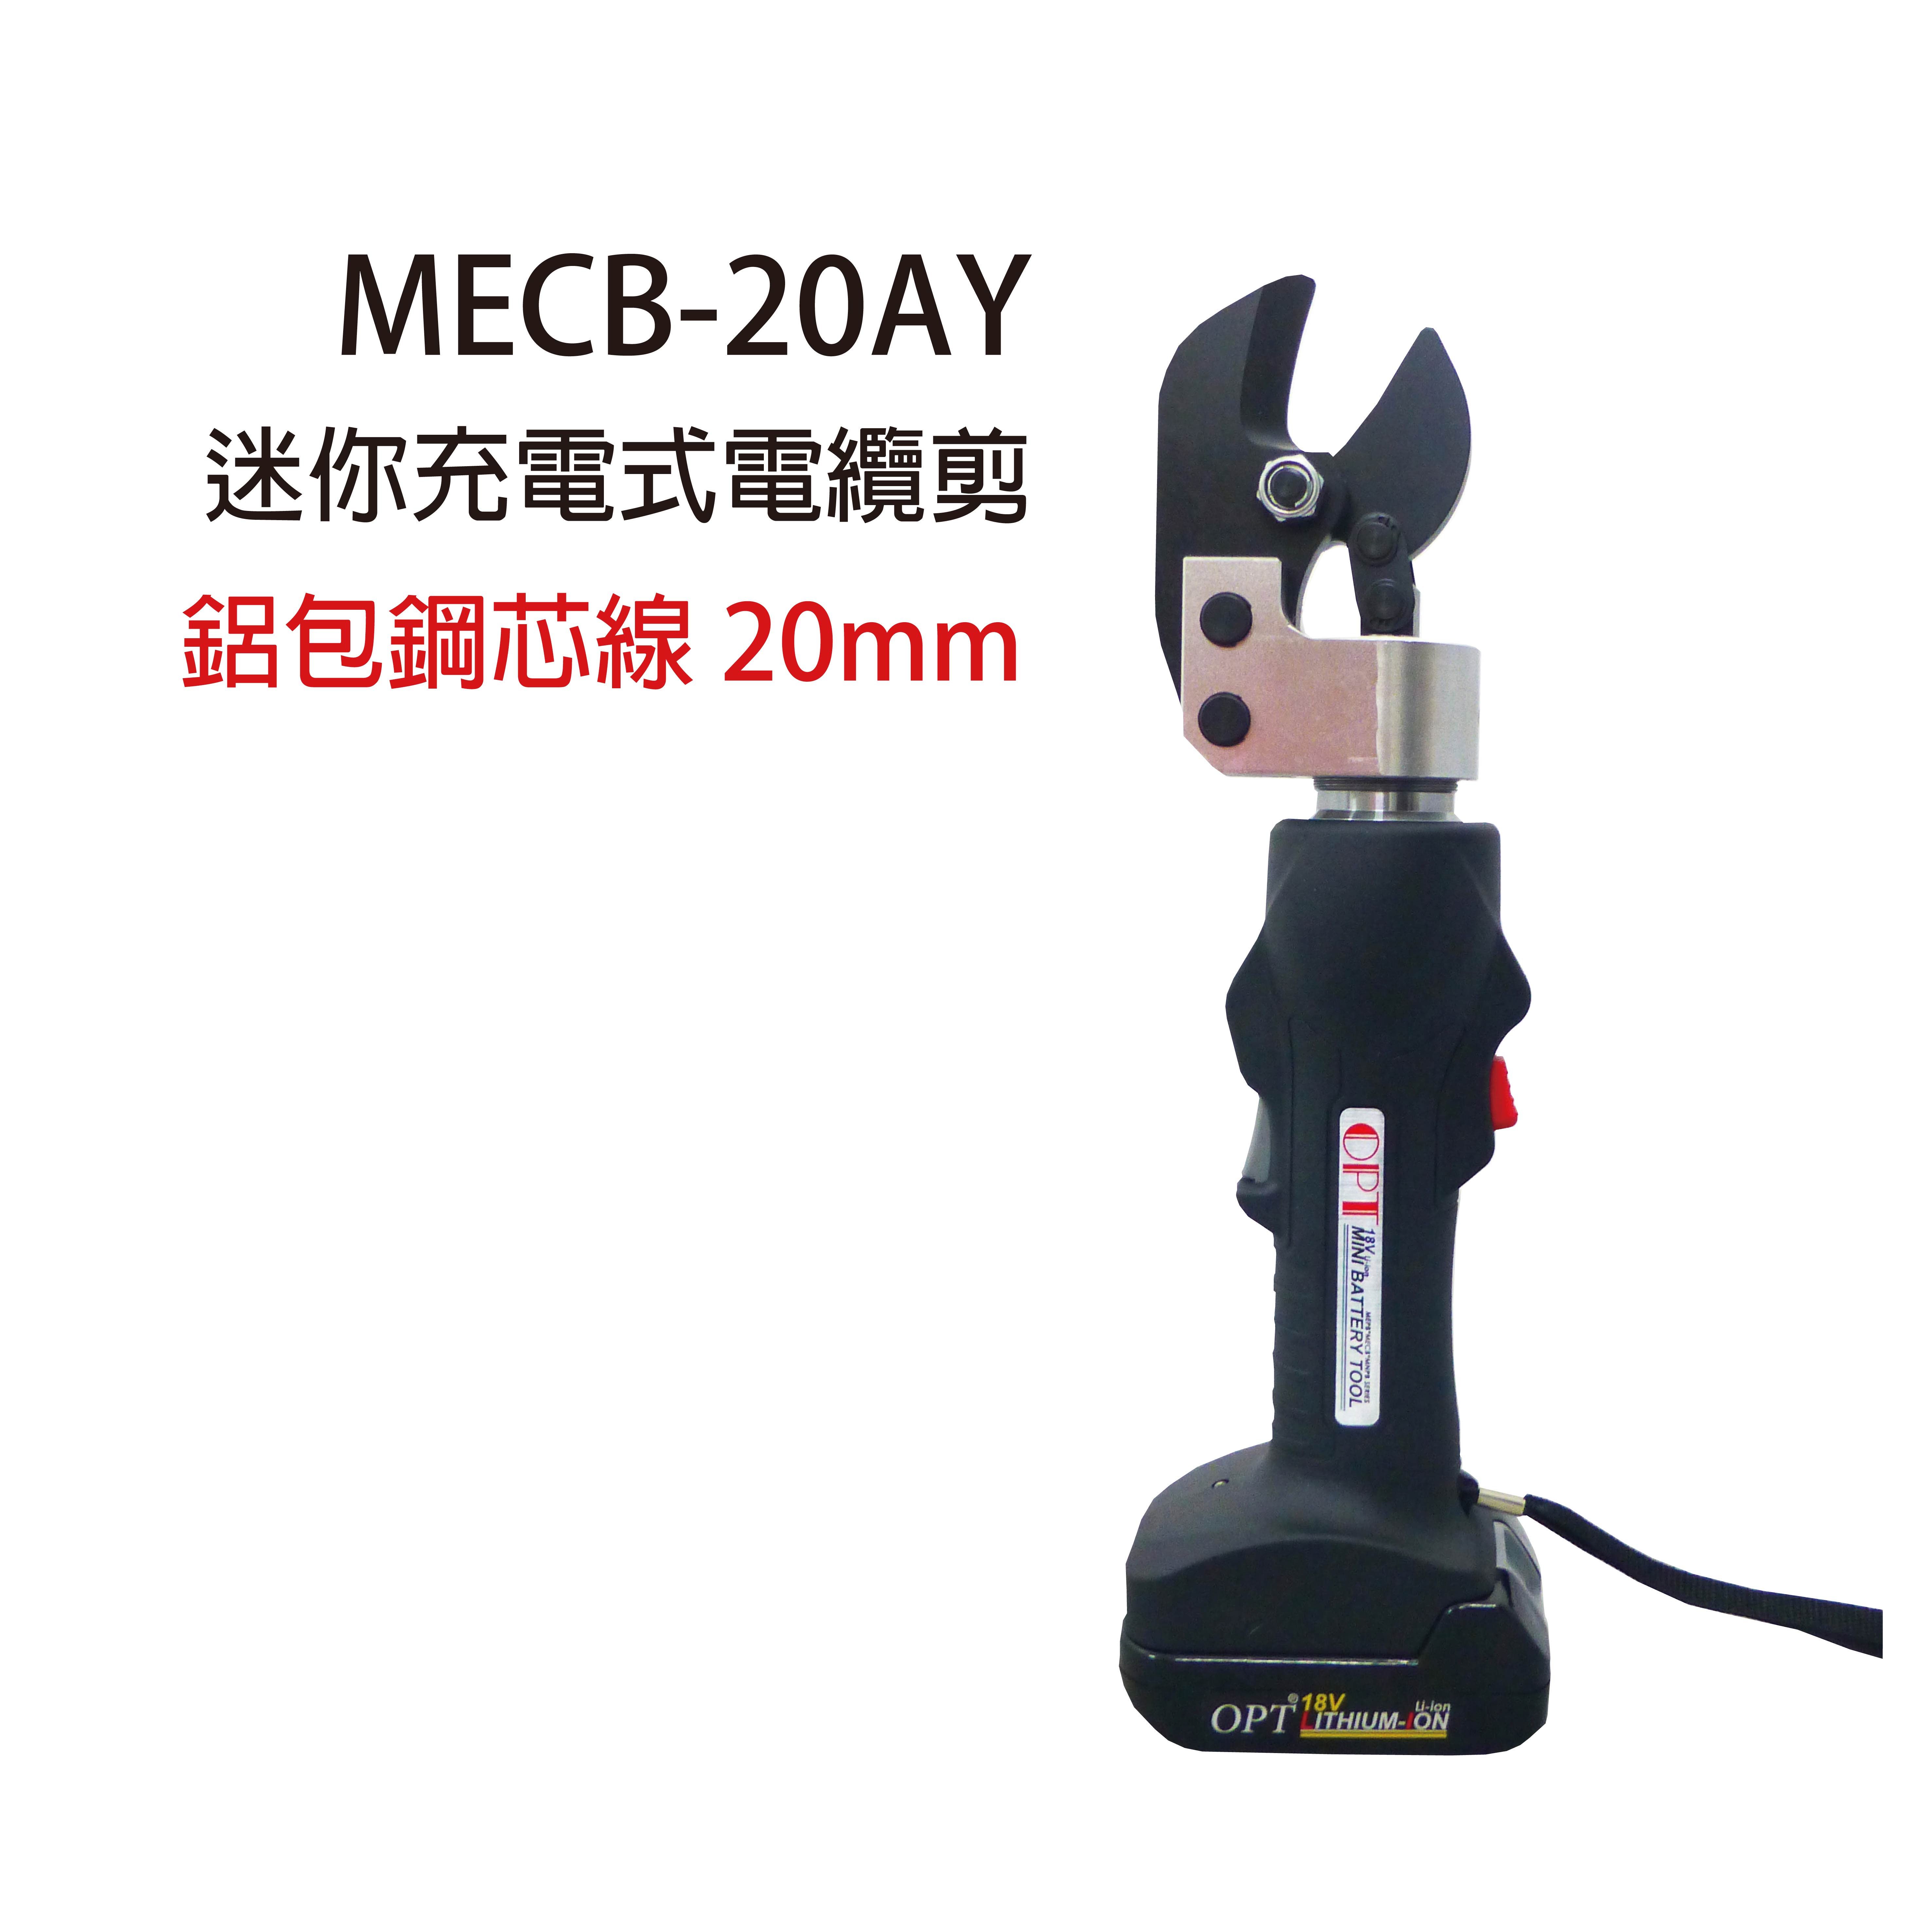 MECB-20AY CORDLESS HYDRAULIC CABLE CUTTERS